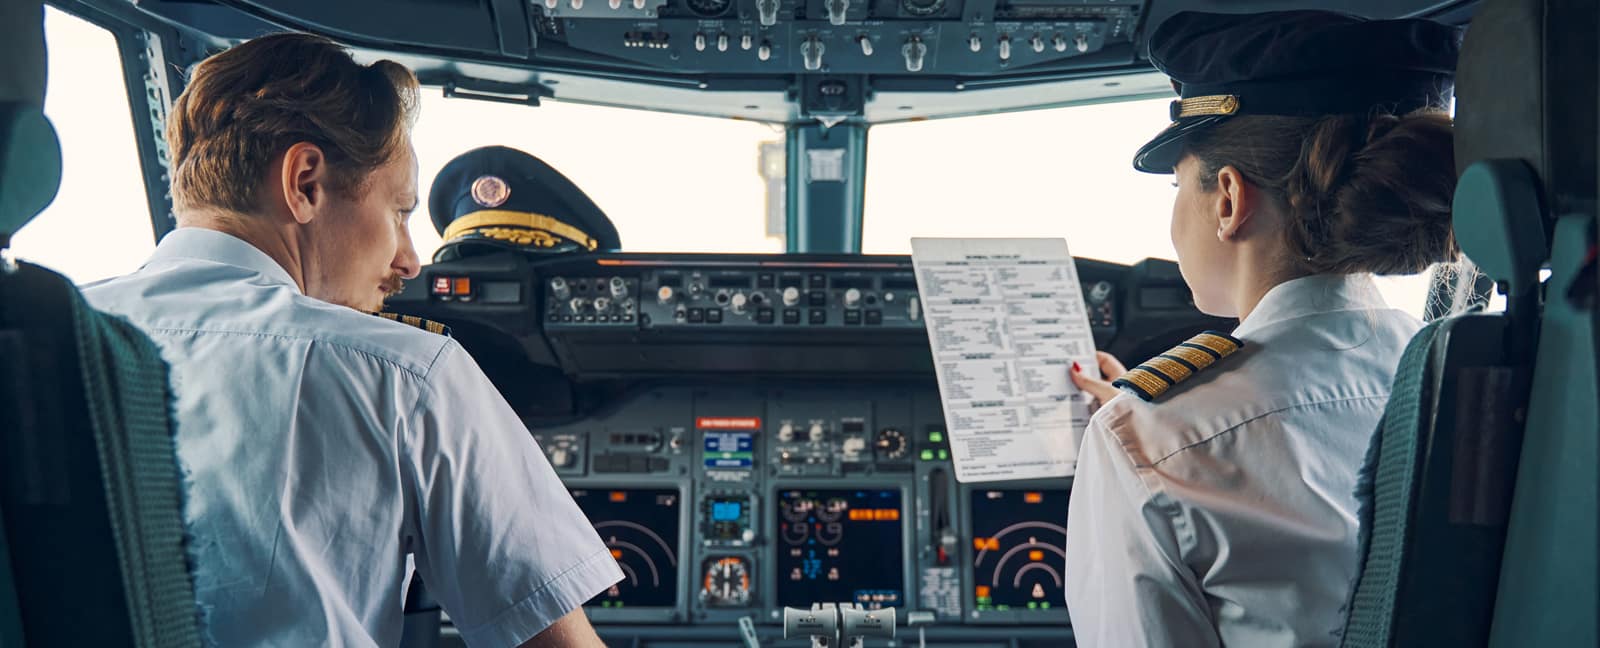 Bachelor of Science in Pilot Operations